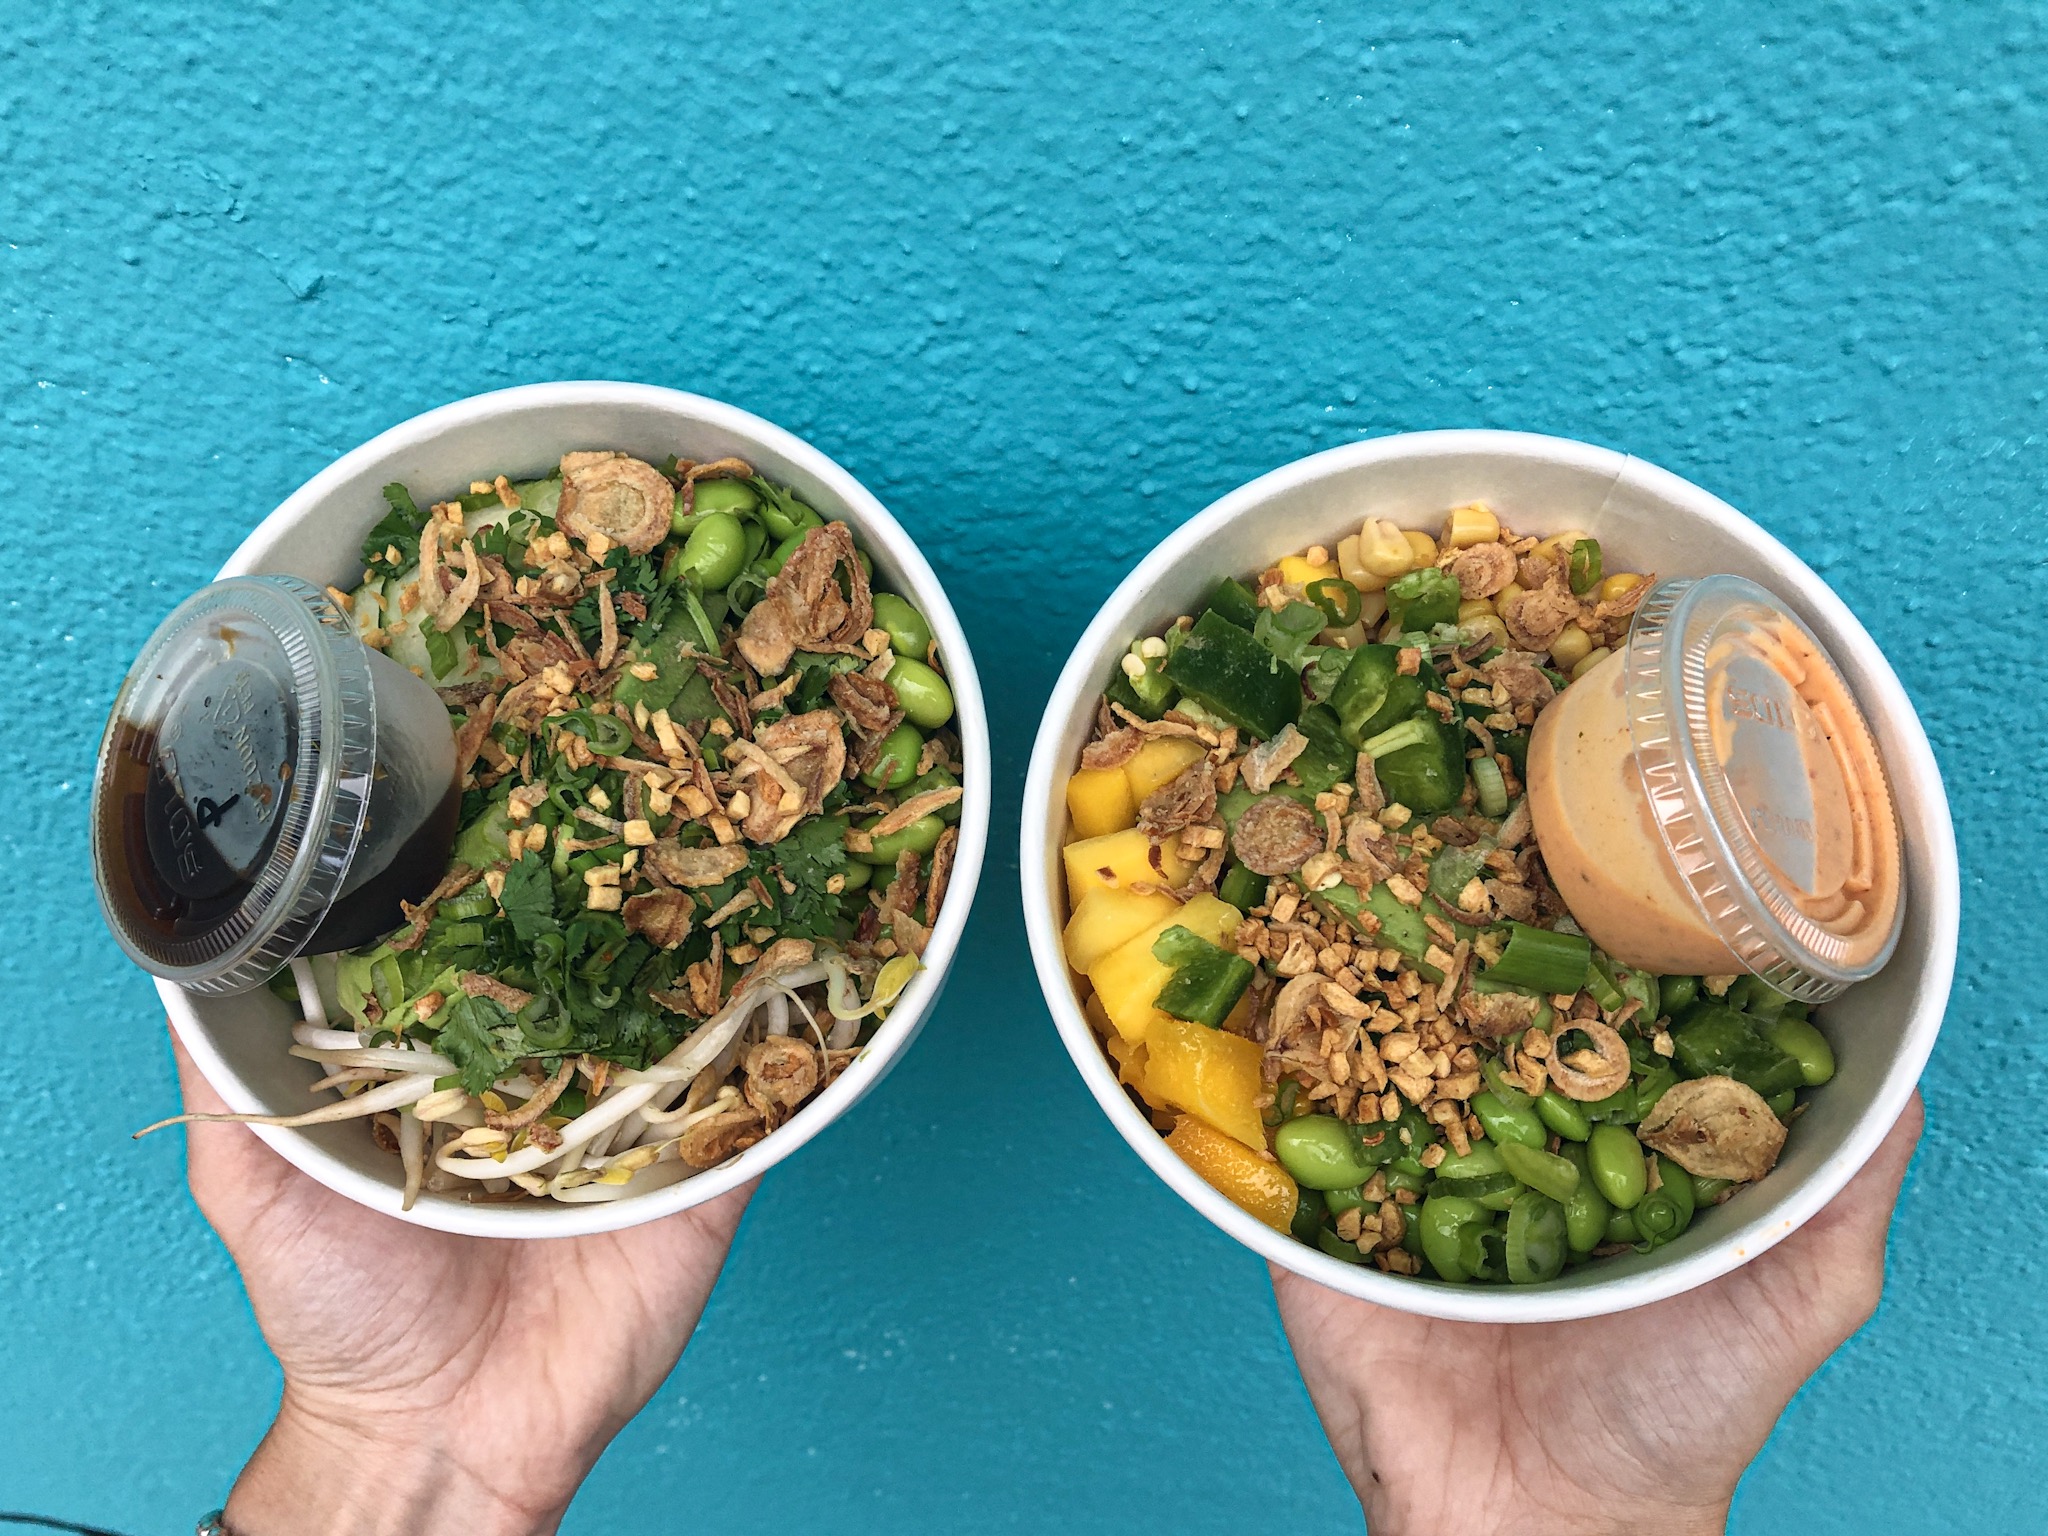 Build your own poké bowls from the Old Southeast Market